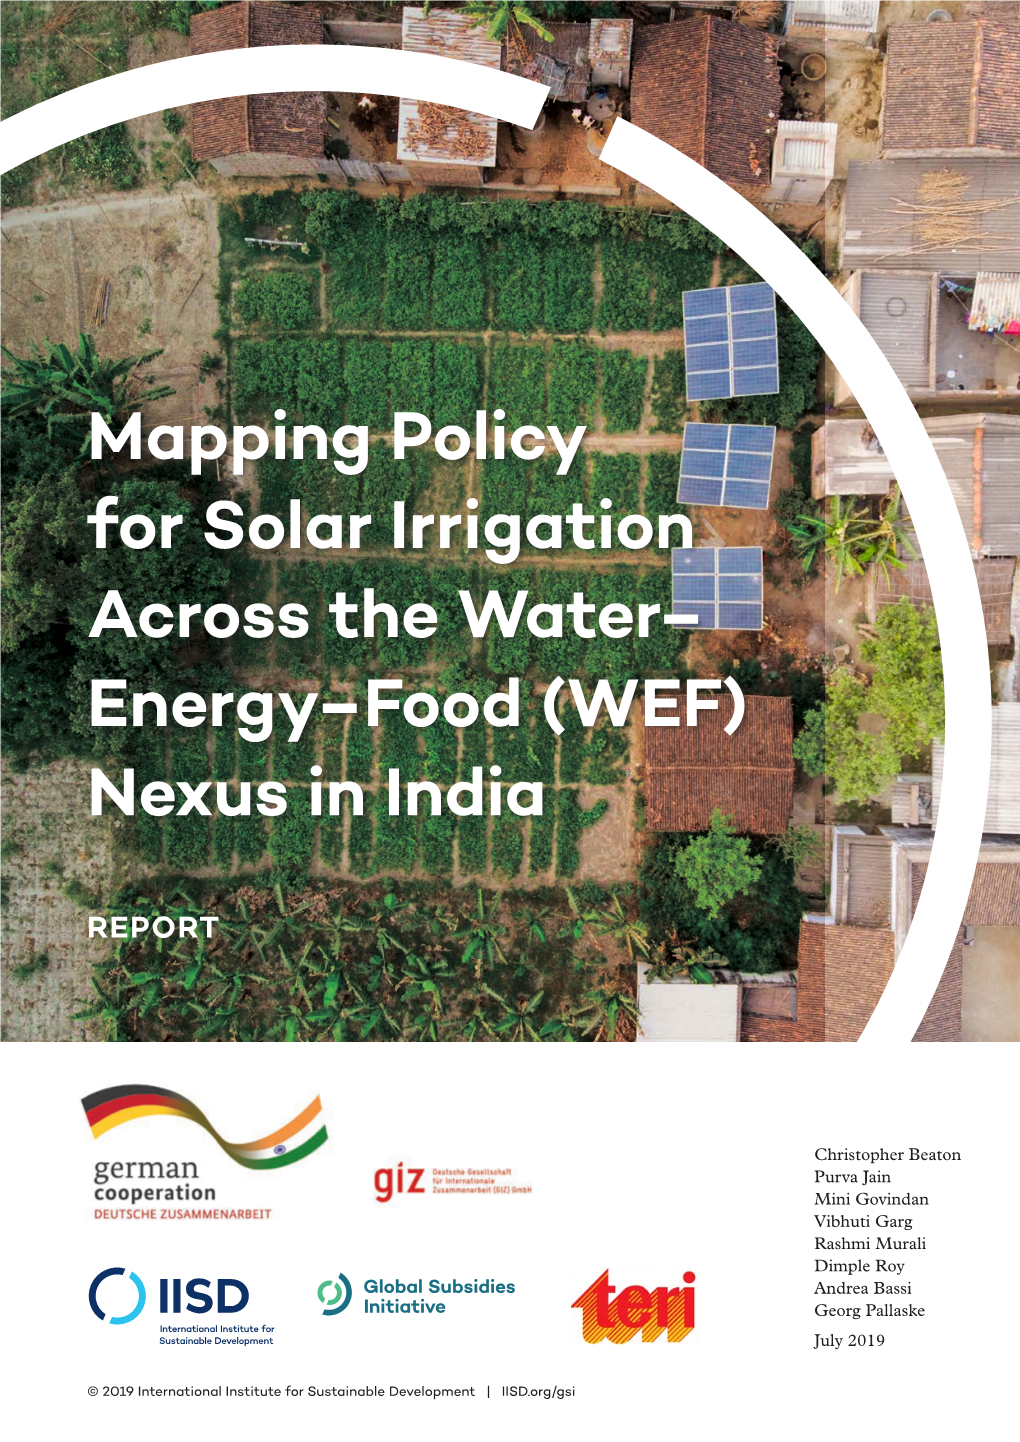 Mapping Policy for Solar Irrigation Across the Water-Energy-Food